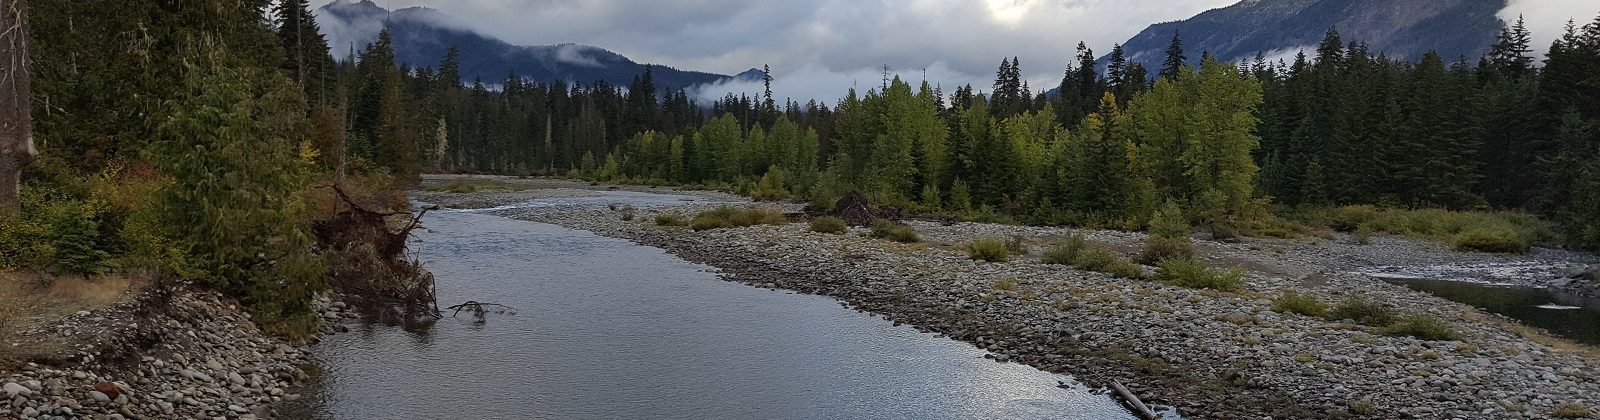 A healthy, connected floodplain on the Cooper River in the Central Cascades of WA | Photo: Jonathon Loos